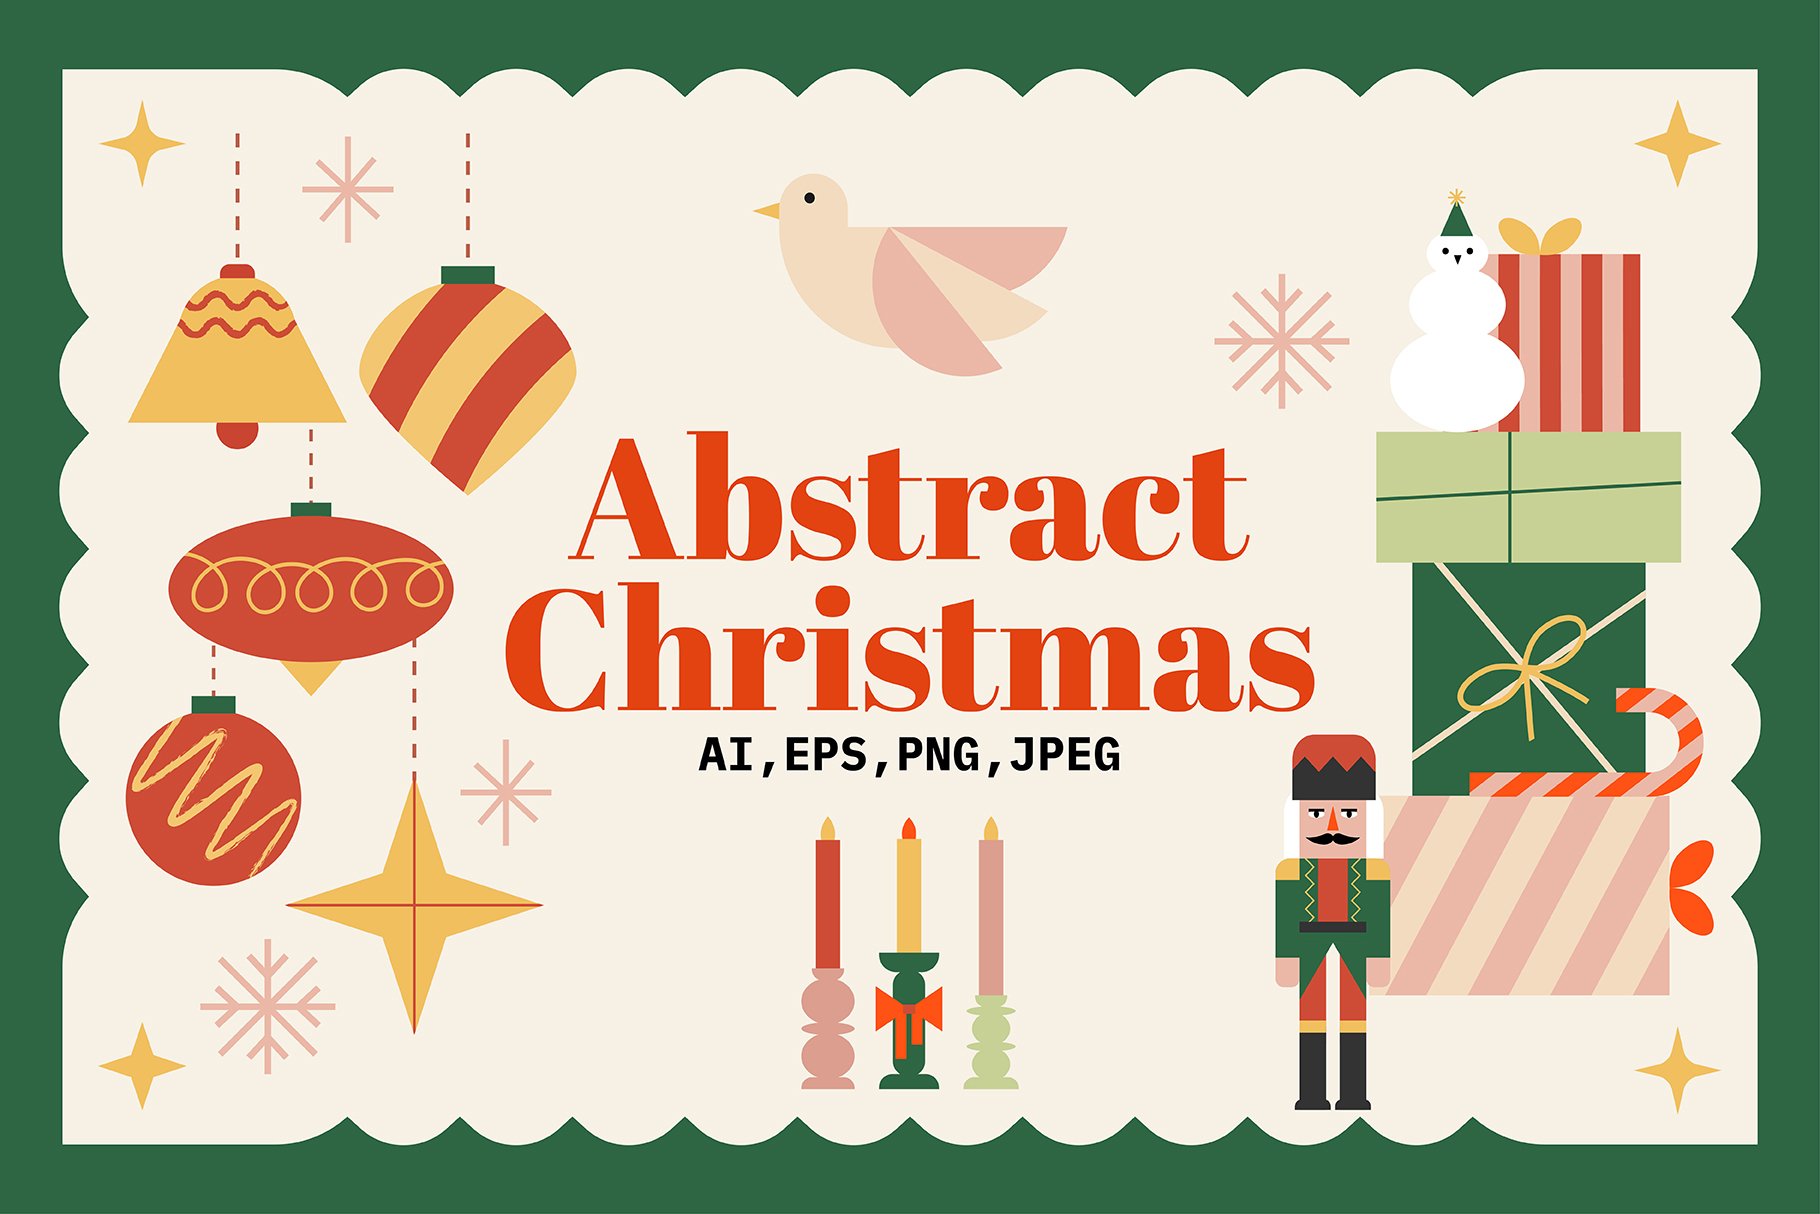 Abstract Christmas cliparts, posters cover image.